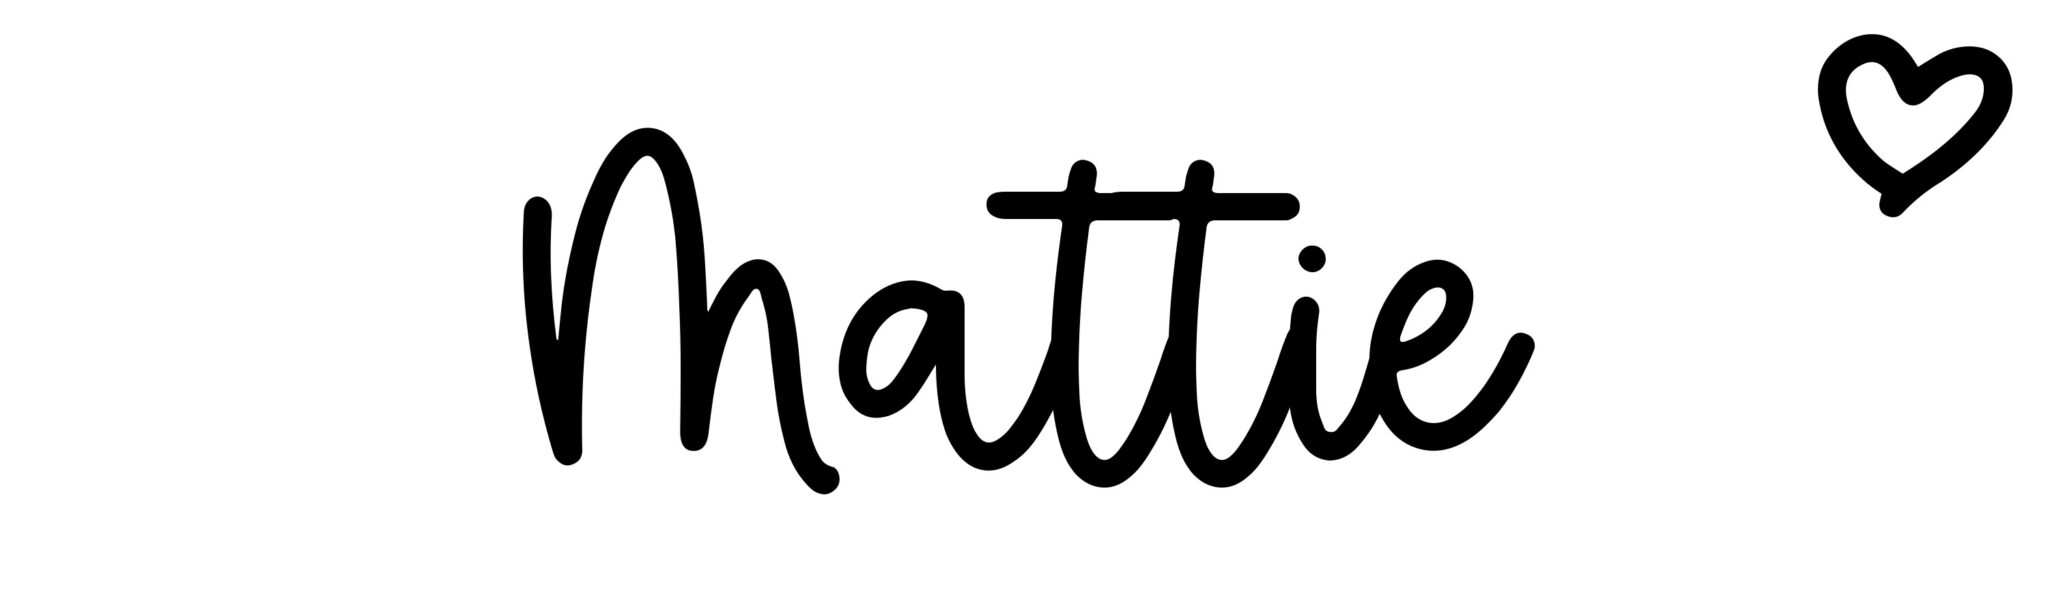 Mattie - Name meaning, origin, variations and more